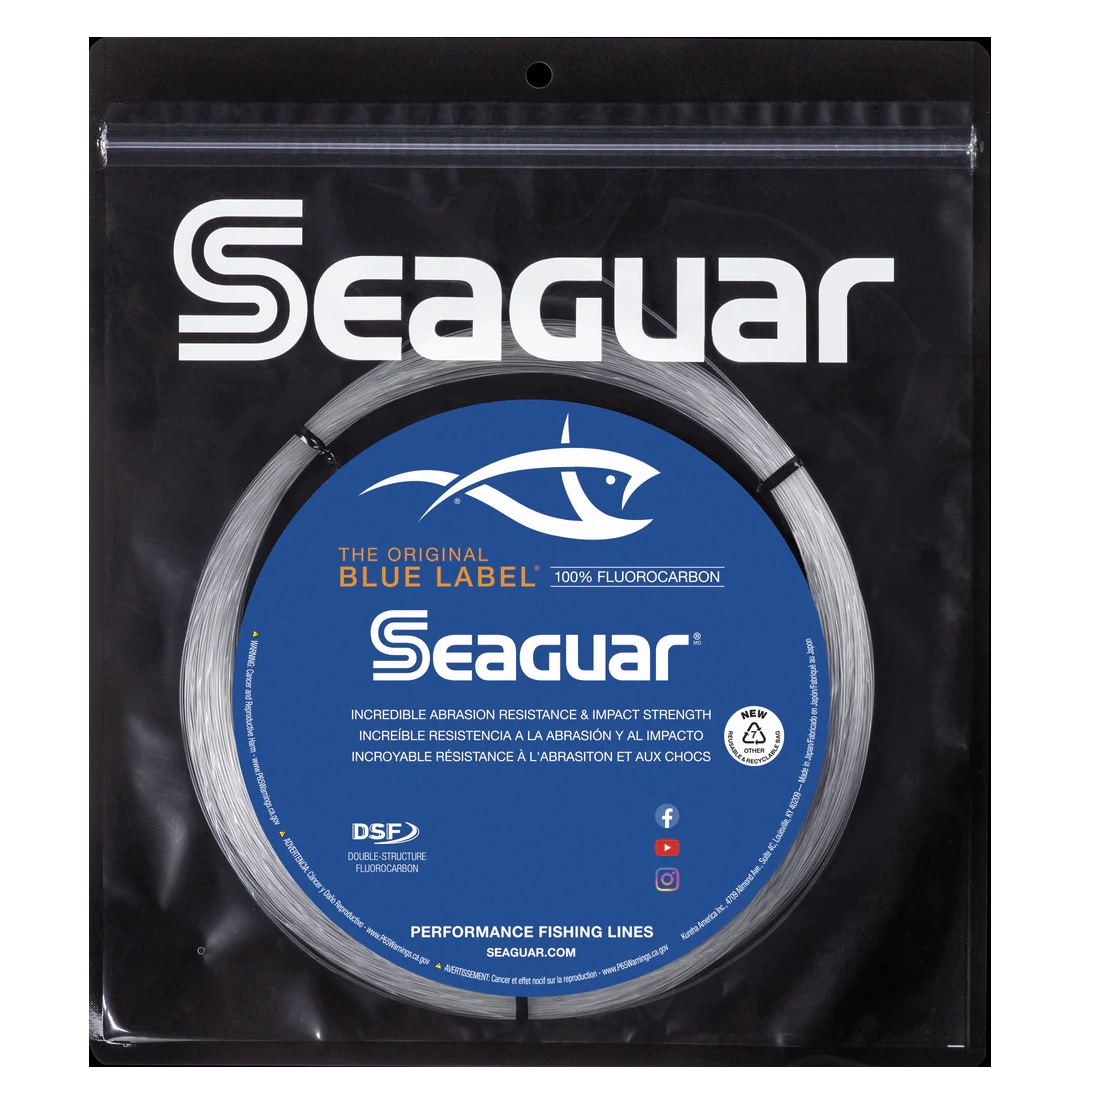 SEAGUAR BLUE LABEL FLUOROCARBON 110YD COILS - Fisherman's Outfitter